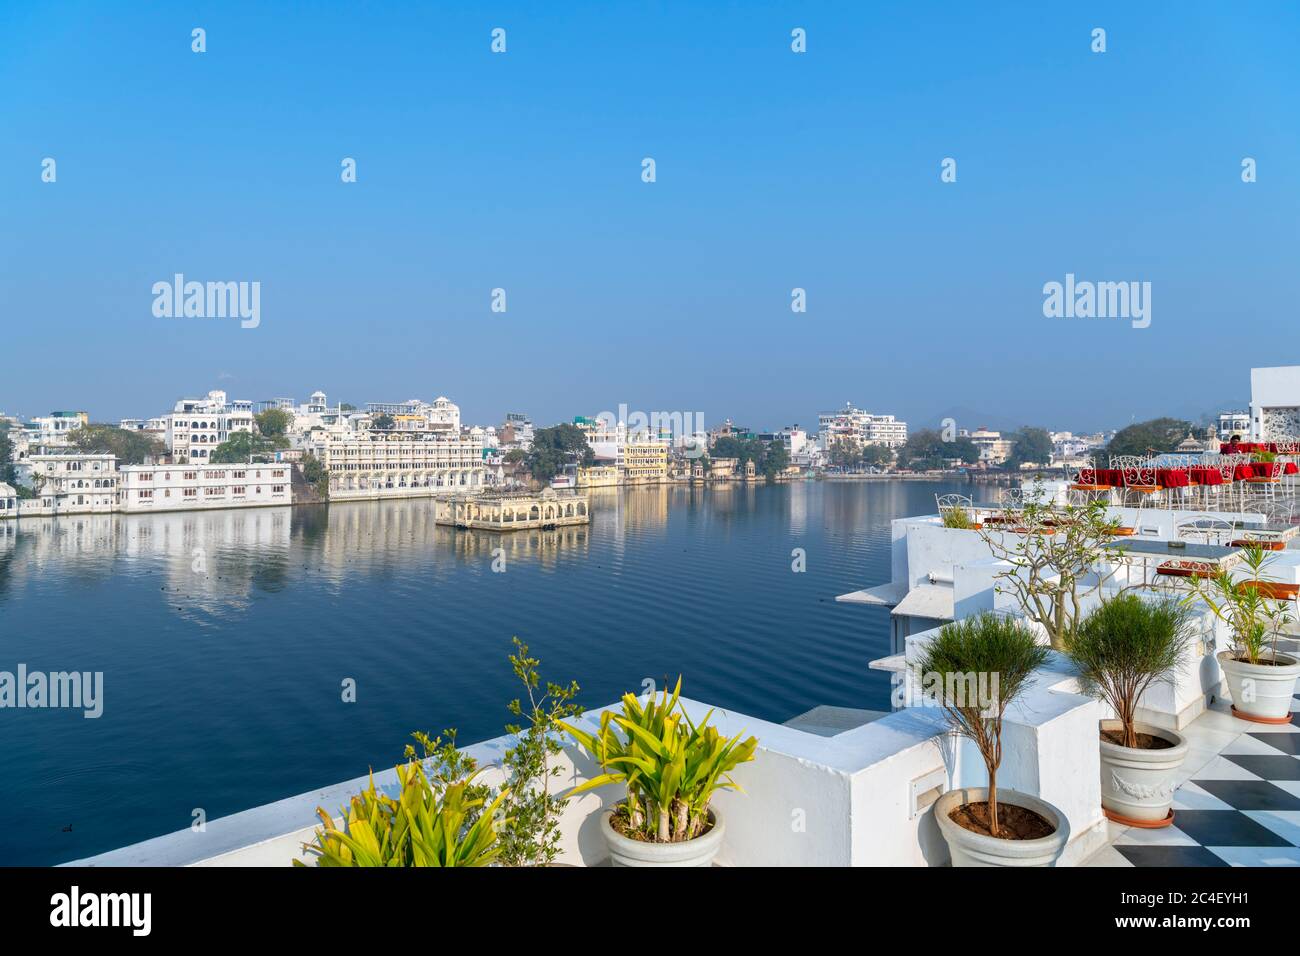 View over the old city and Lake Pichola from the Jagat Niwas Palace Hotel in the early morning, Udaipur, Rajasthan, India Stock Photo